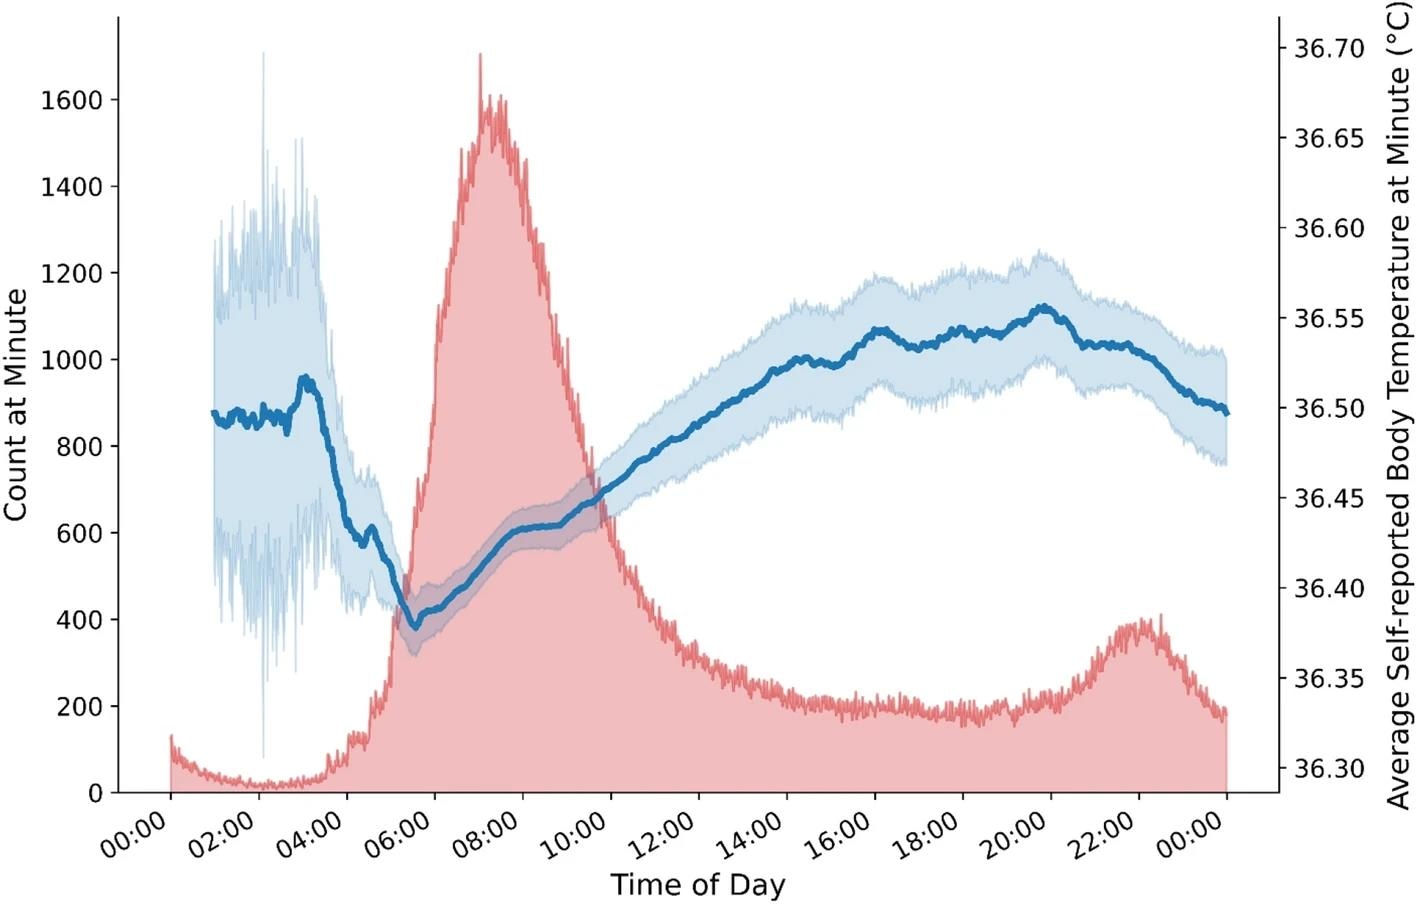 Average self-reported body temperature by time of day. The figure shows the expected diurnal pattern of lowest self-reported body temperatures reported in the early morning and increases in self-reported body temperature during daytime hours. Note. The blue line shows the average self-reported body temperature by time of day (right Y-axis). Blue shading indicates standard error of the mean. Red shading indicates the number of responses (left Y-axis) provided in each minute (X-axis).